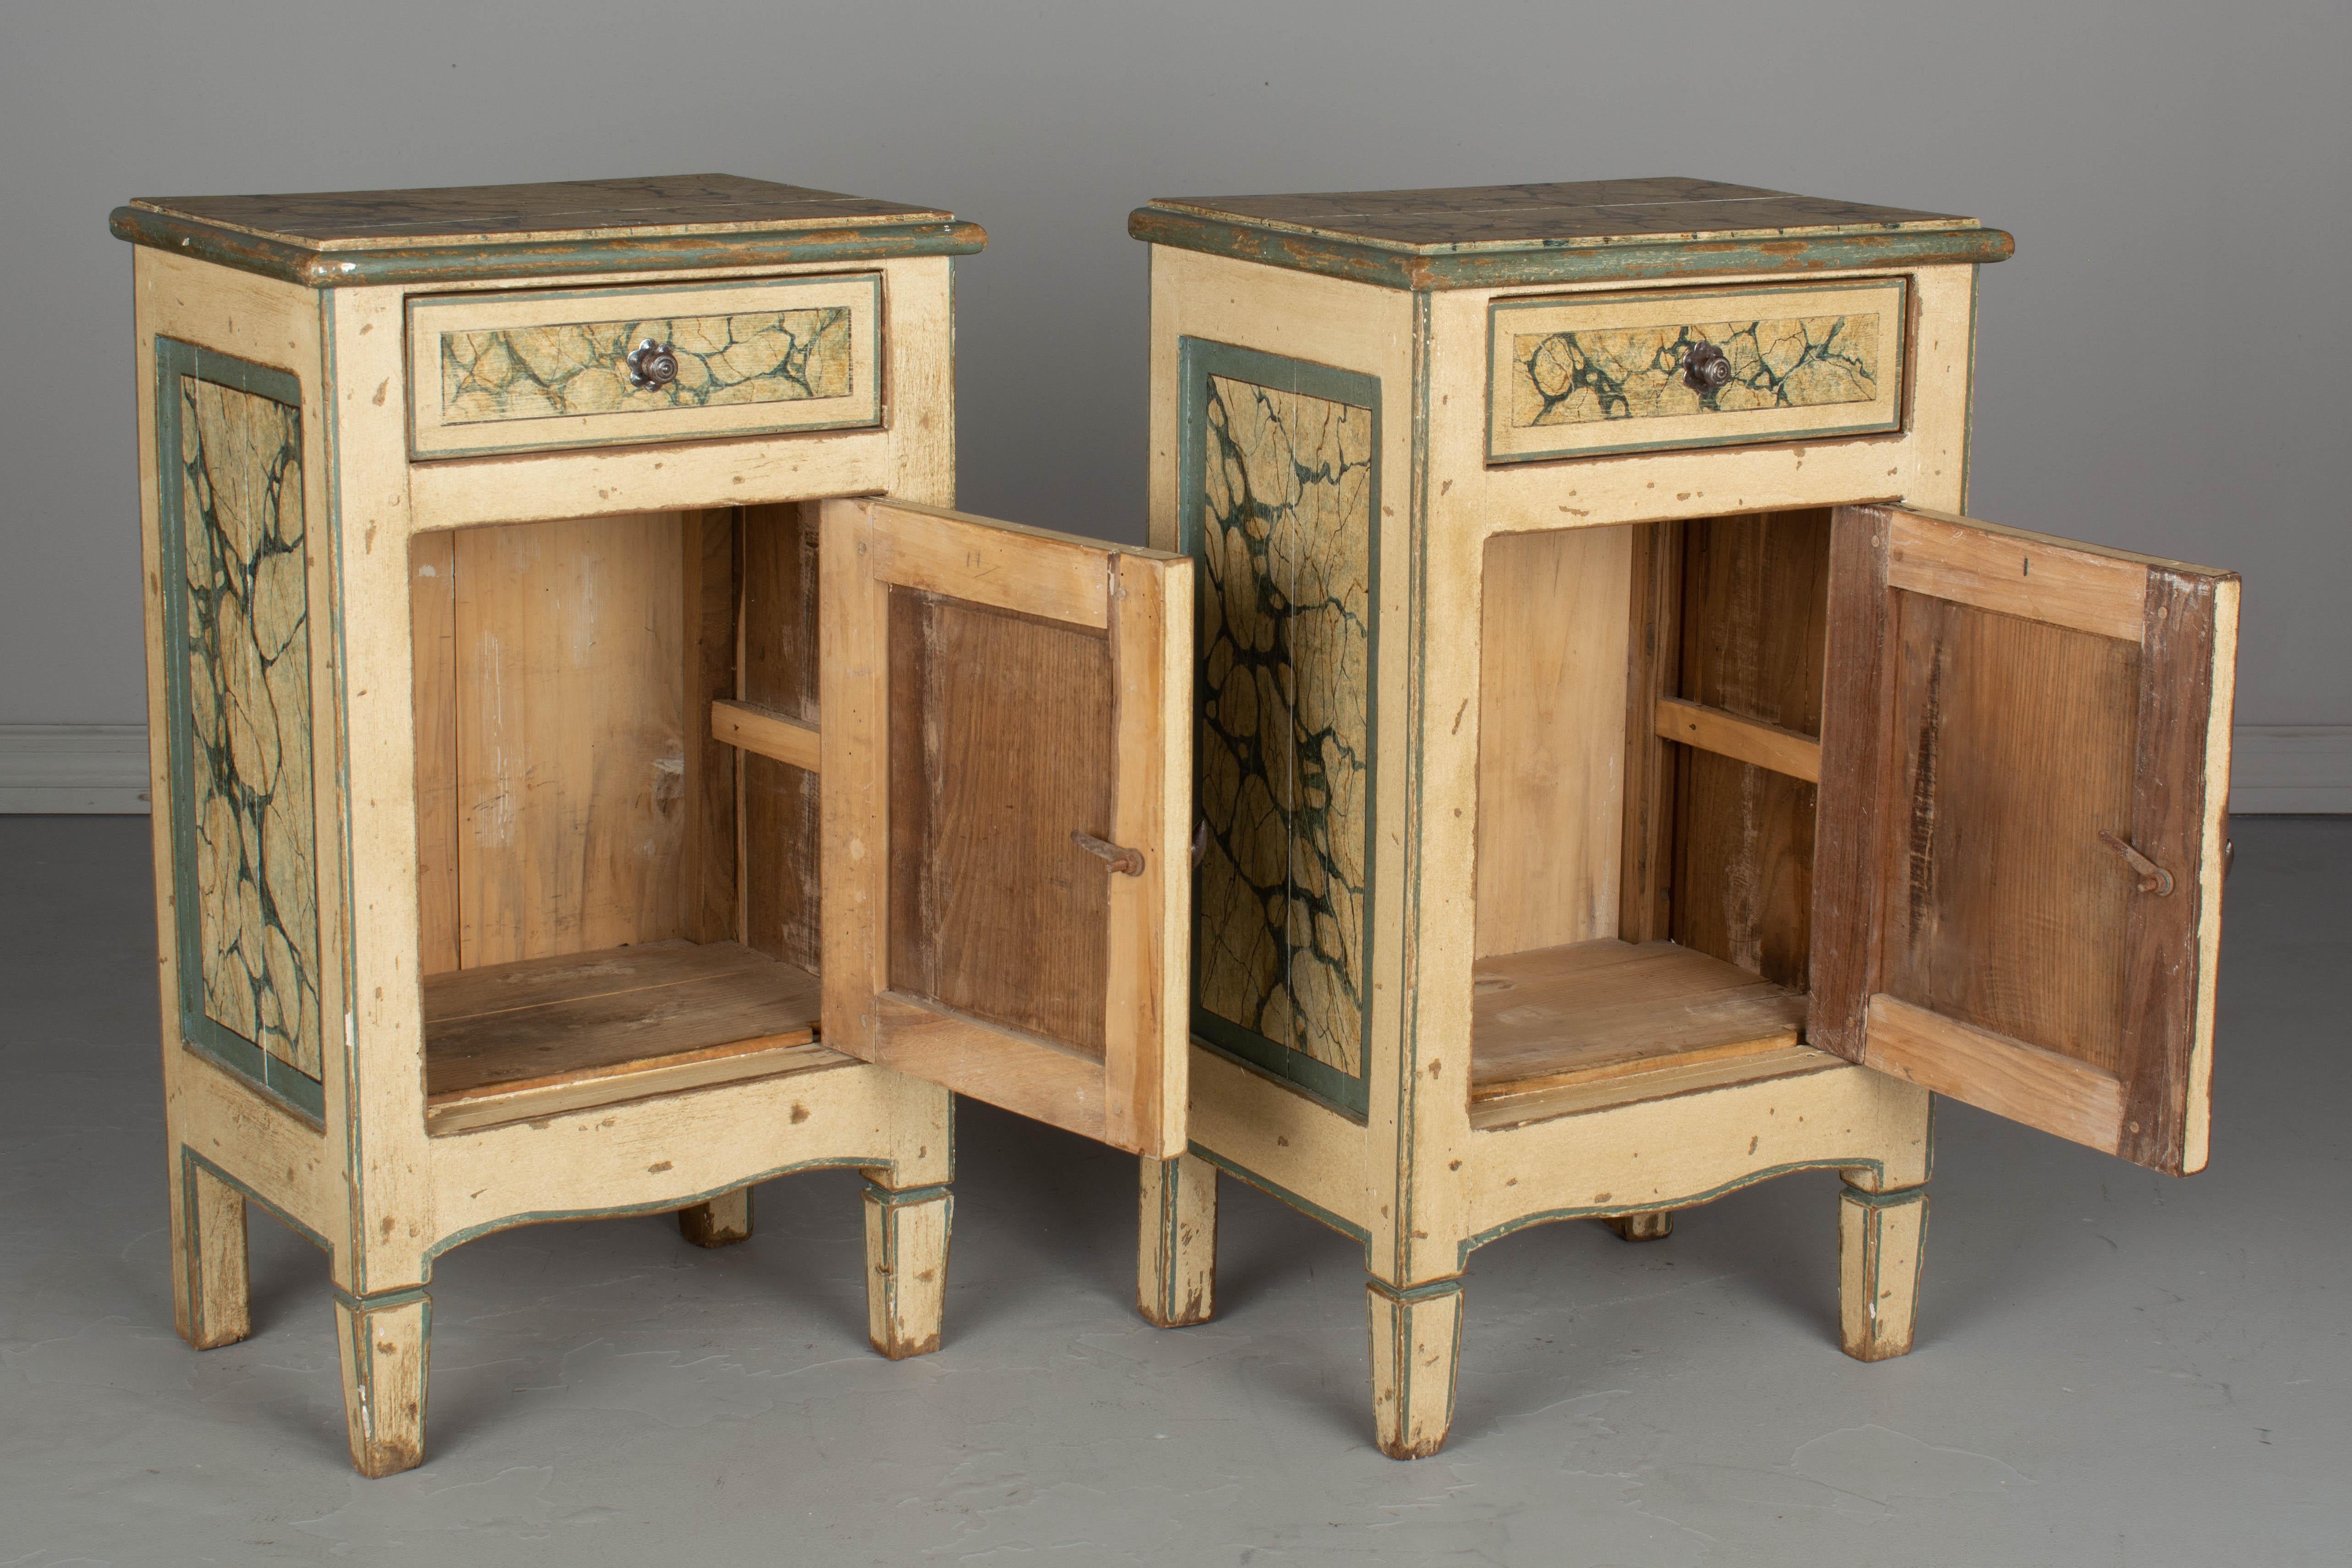 20th Century Pair of Italian Faux Marble Painted Nightstands